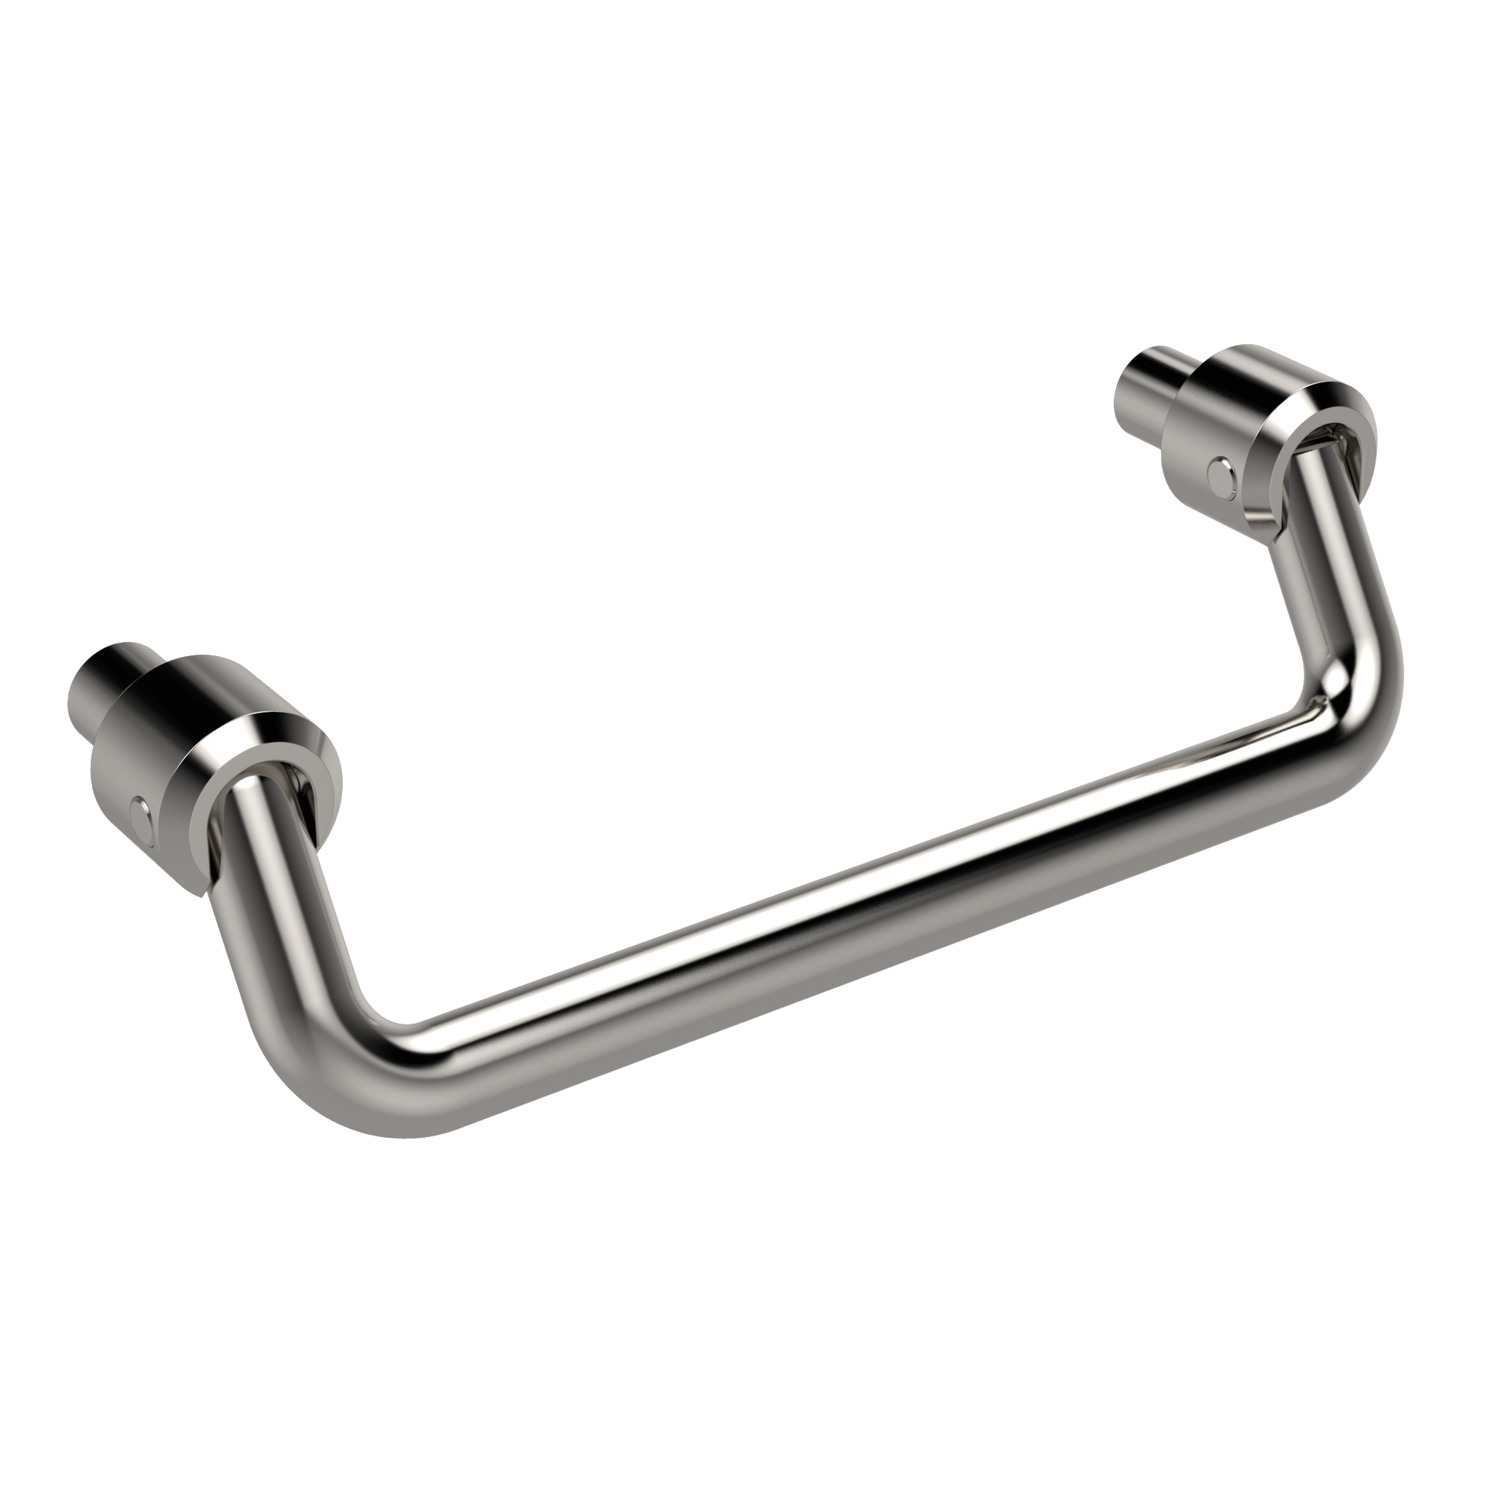 Product 78970, Pull Handles - Collapsible stainless steel / 